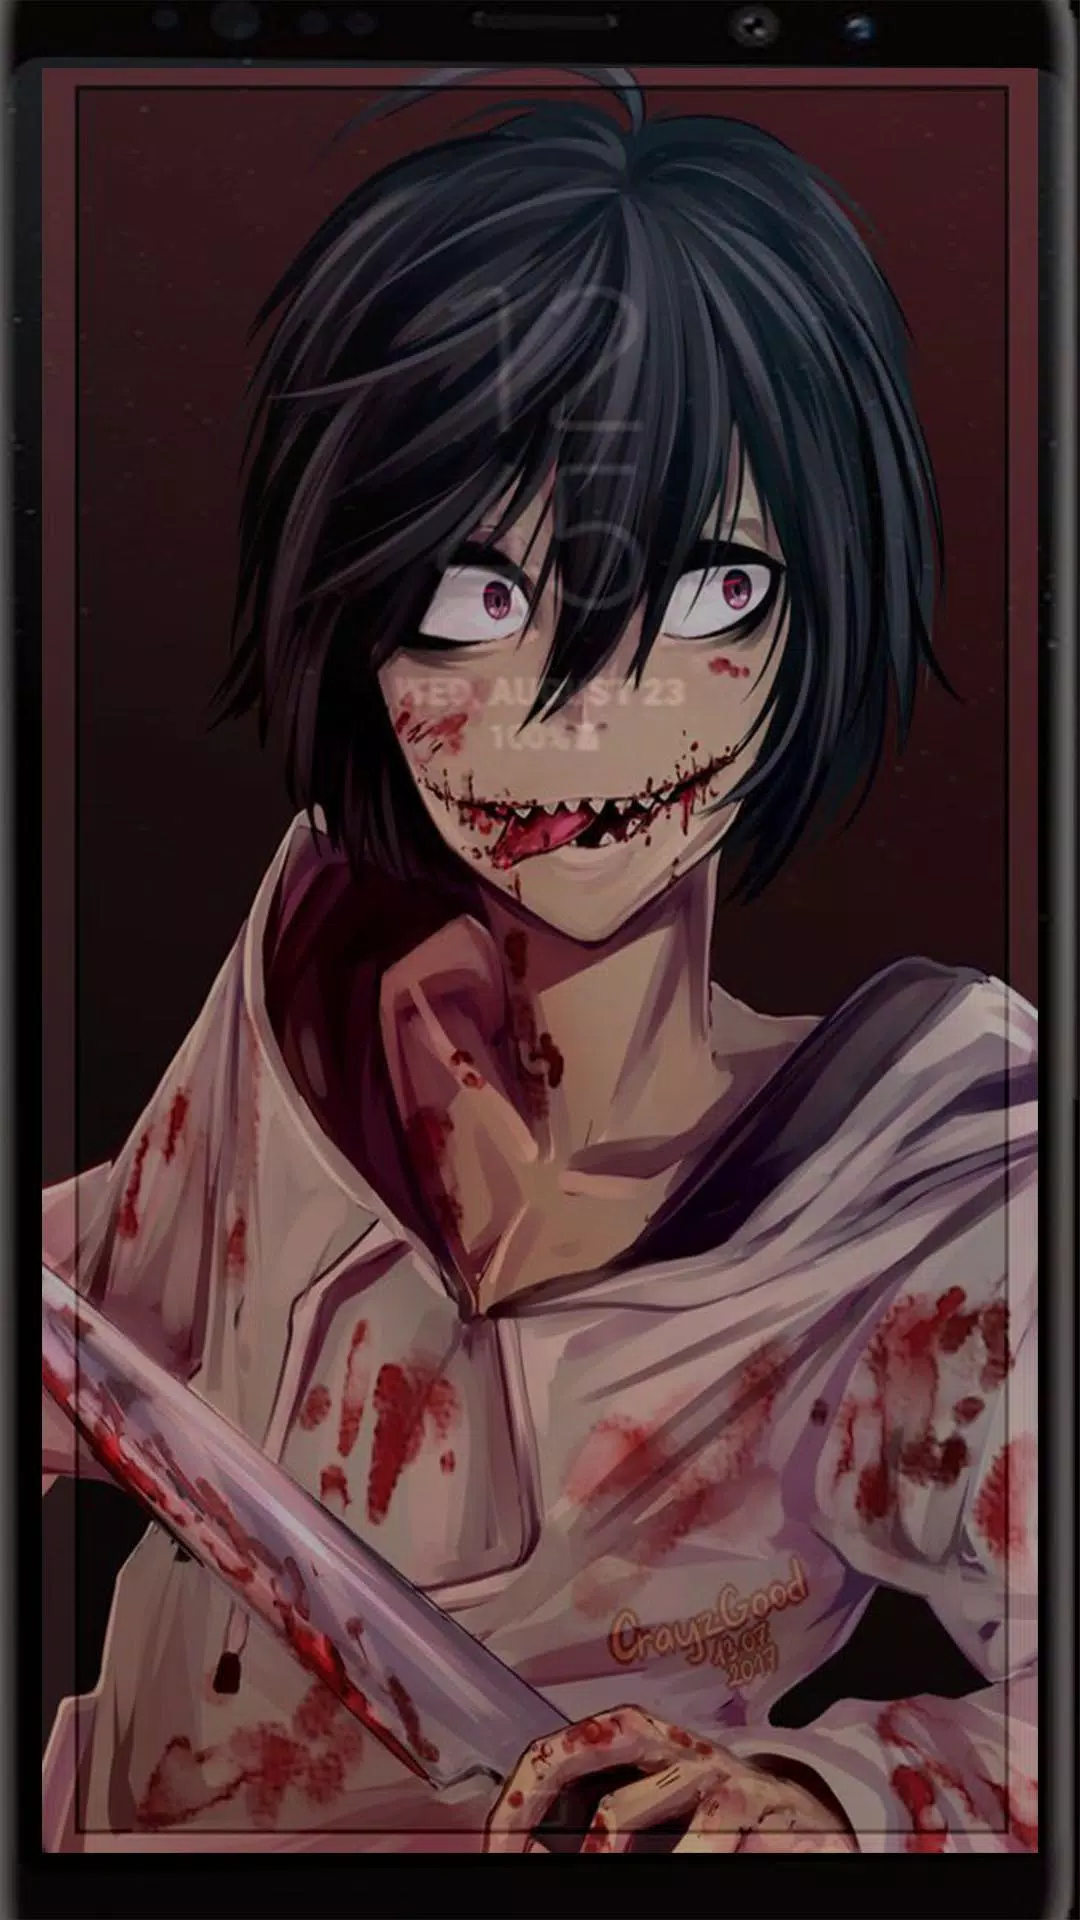 Jeff The Killer Wallpaper 2019 HD APK for Android Download